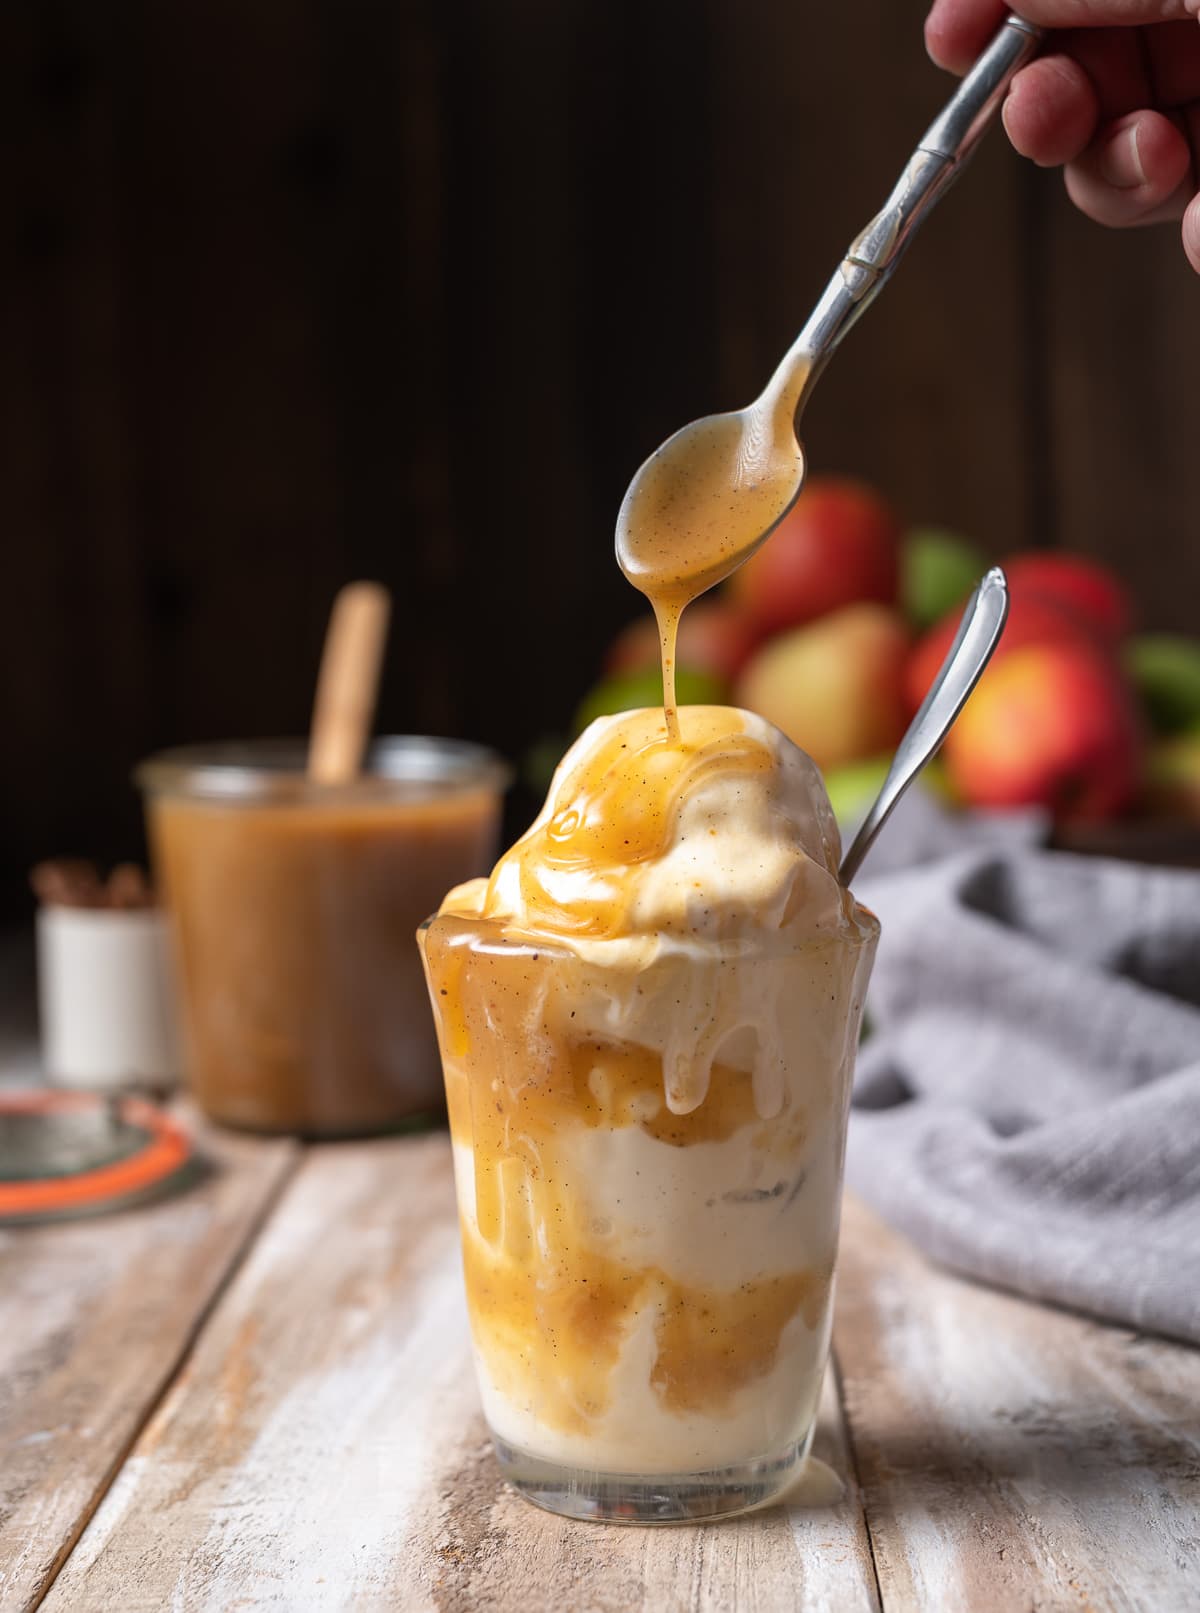 apple cider caramel sauce being poured over a glass cup of ice cream with a spoon